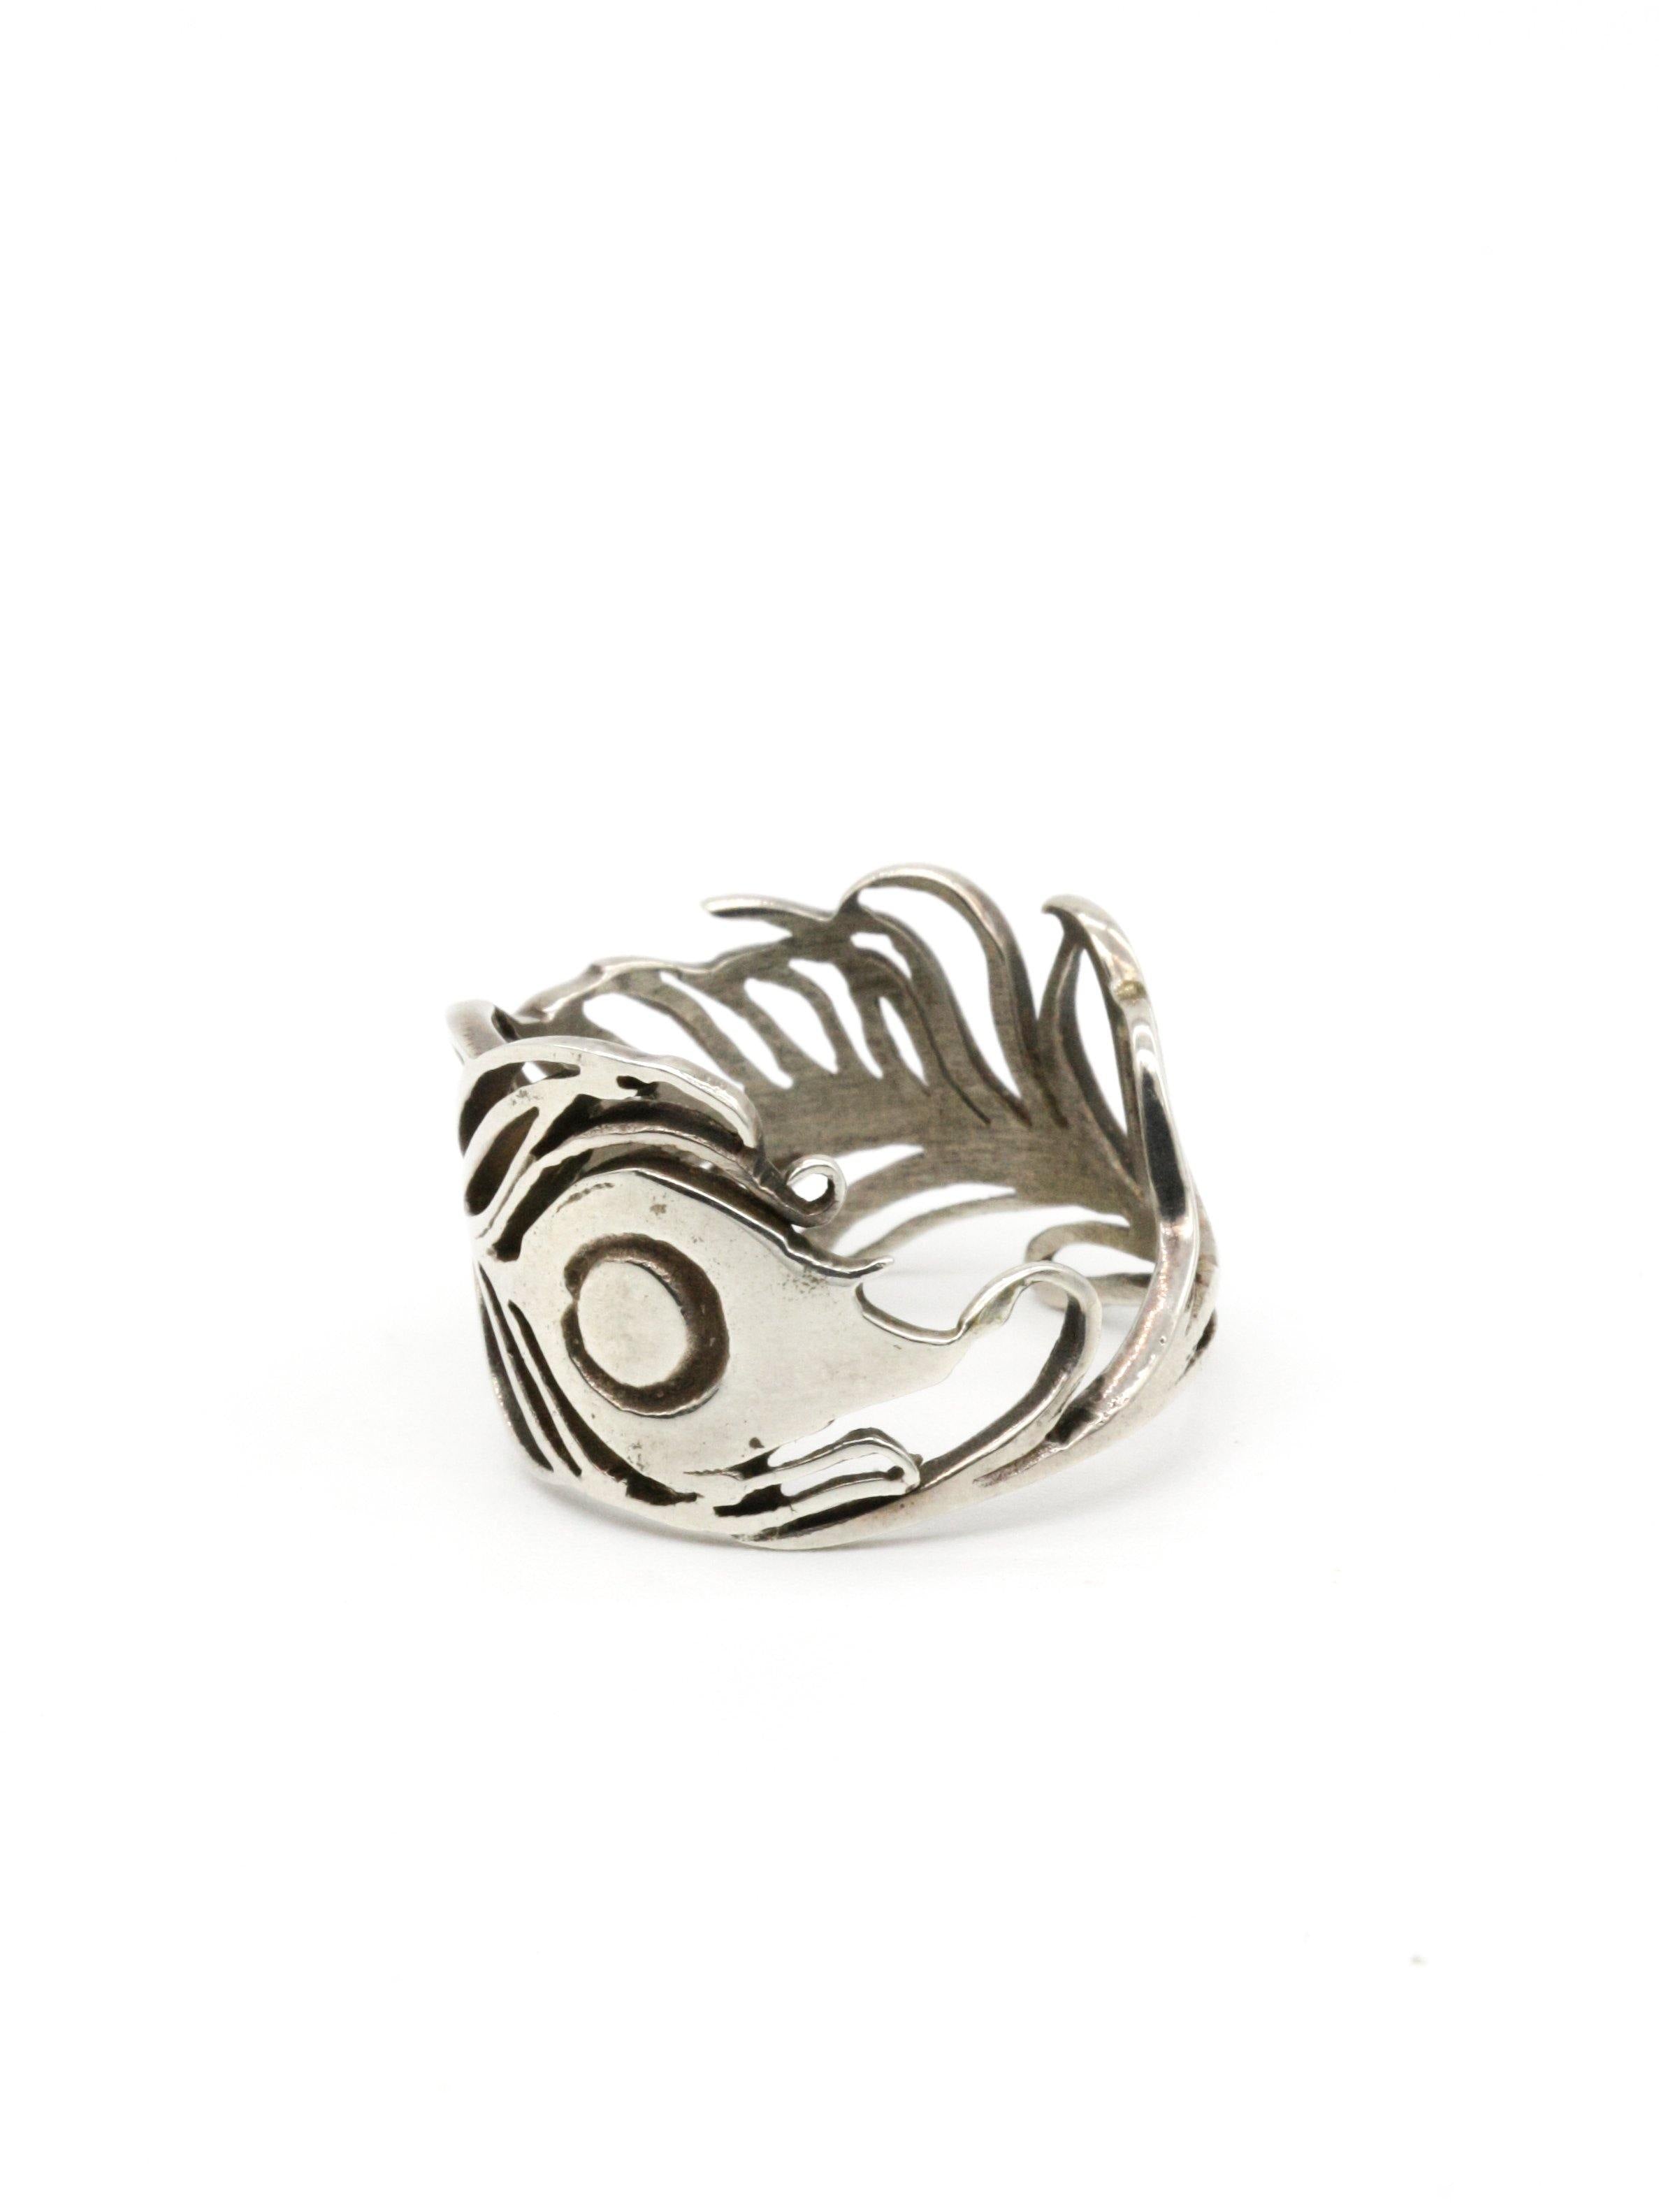 Meadowlark Peacock Feather Ring